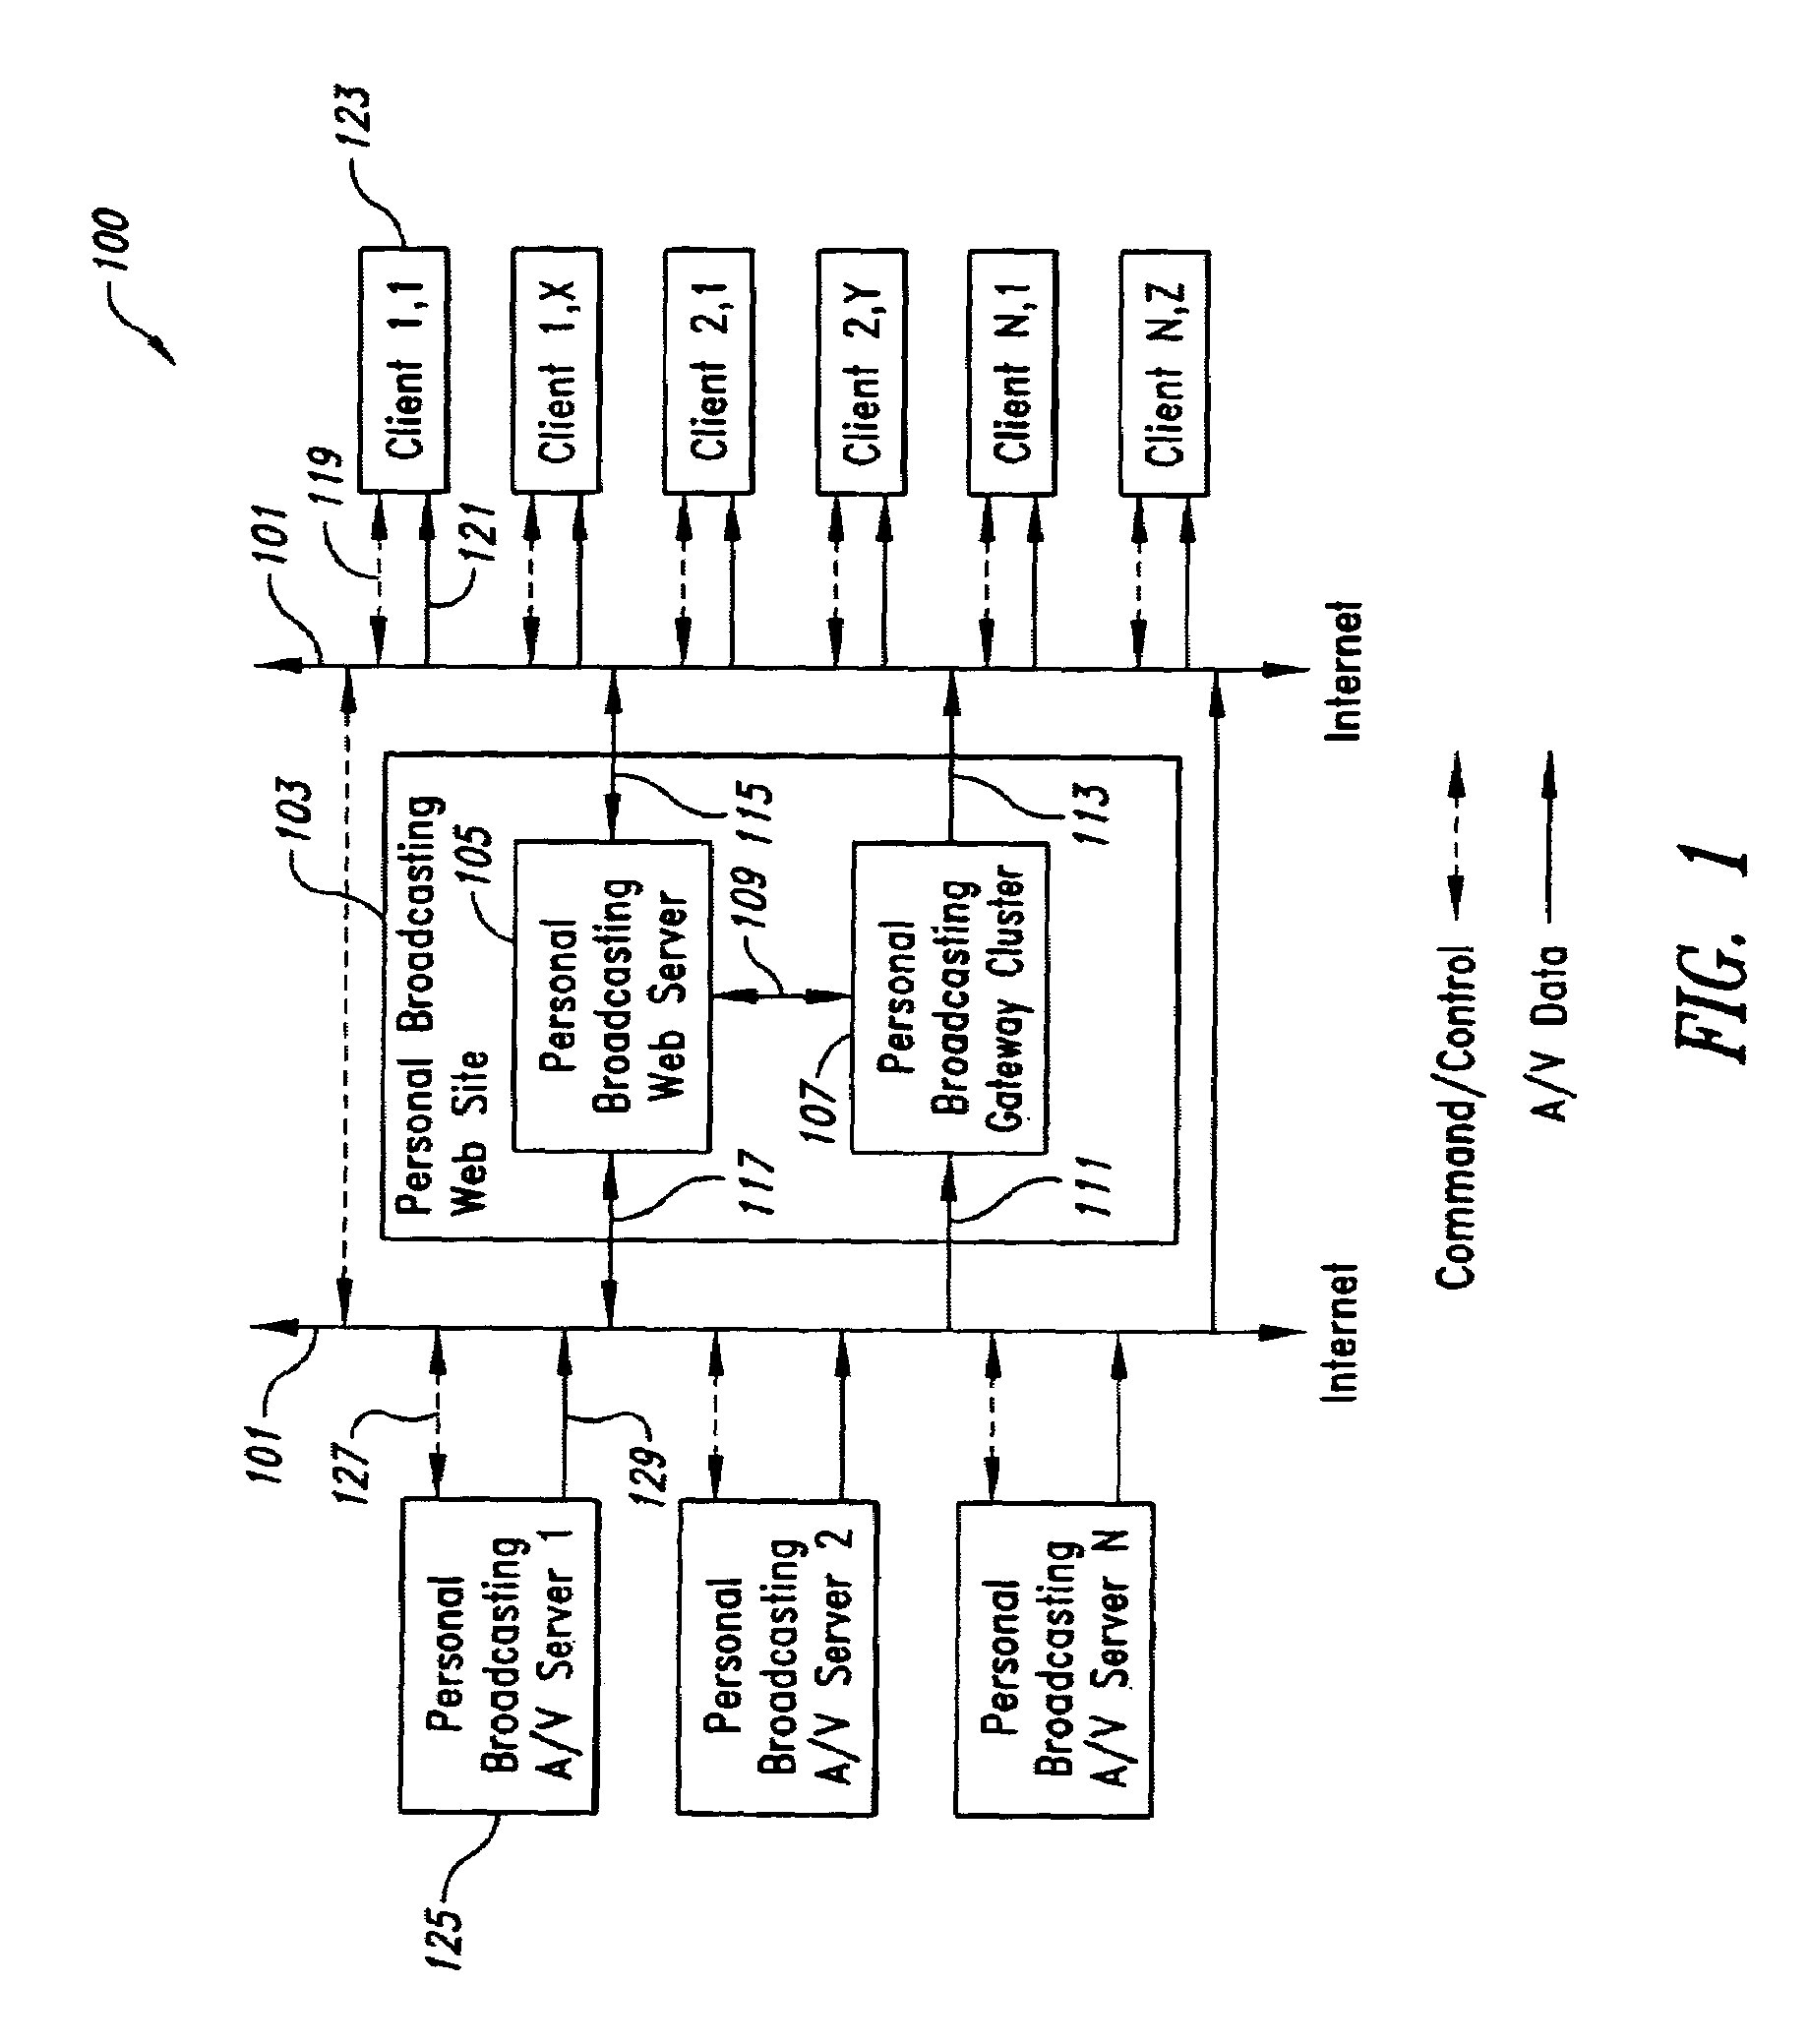 Personal broadcasting system for audio and video data using a wide area network